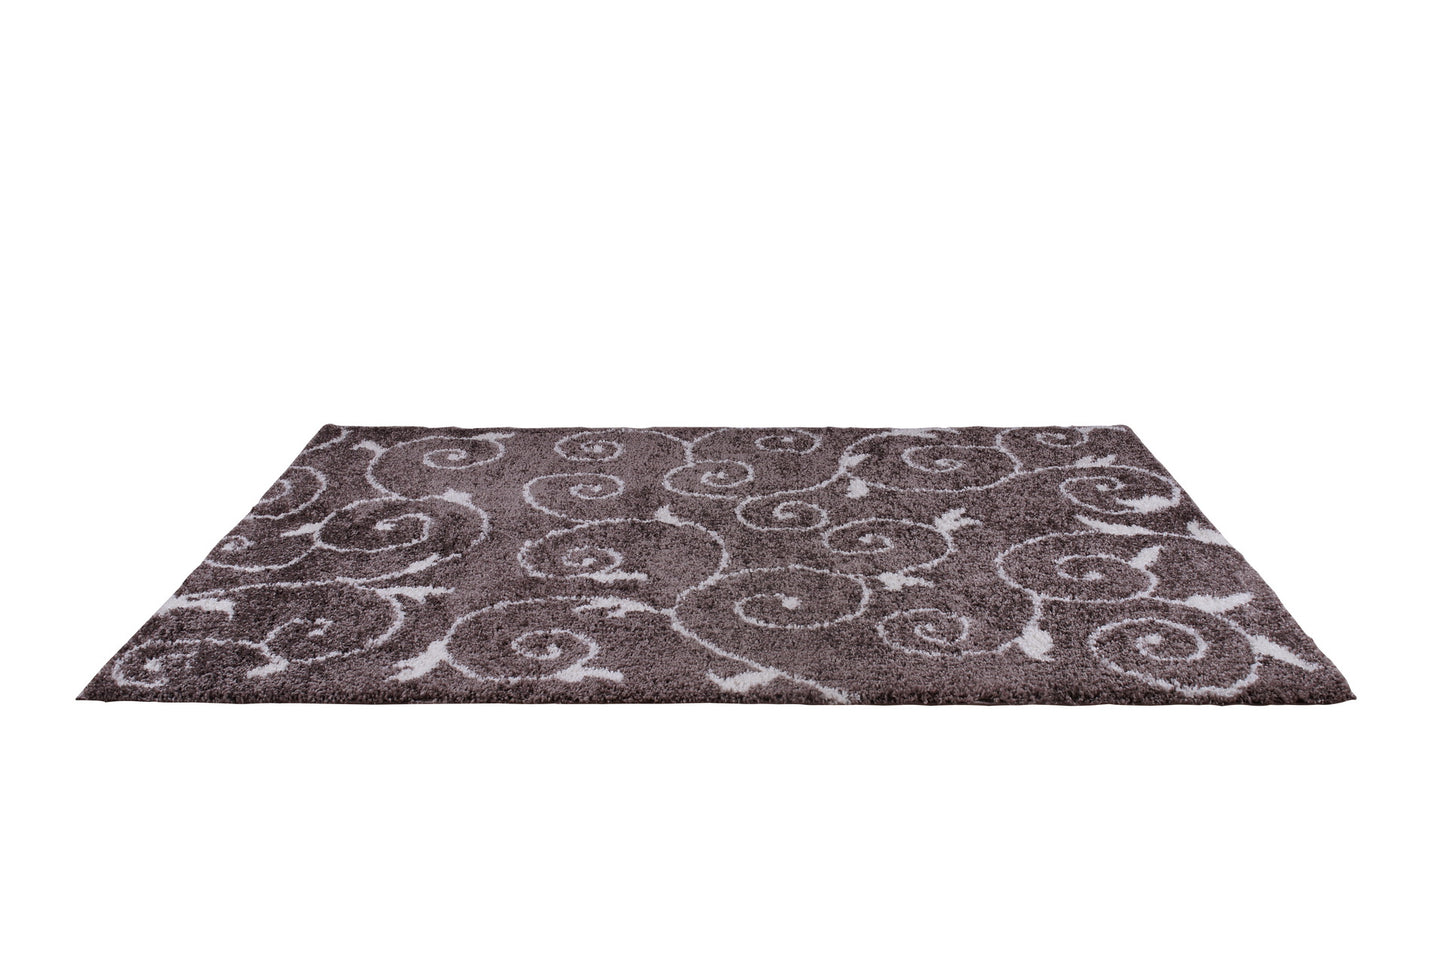 ladole rugs shaggy rabat abstract pattern sustainable spirals style indoor small mat doormat rug in mink white 110 x 211 57cm x 90cm 2x8, 3x10, 2x10 ft Long Runner Rug, Hallway, Balcony, Entry Way, Kitchen, Stairs